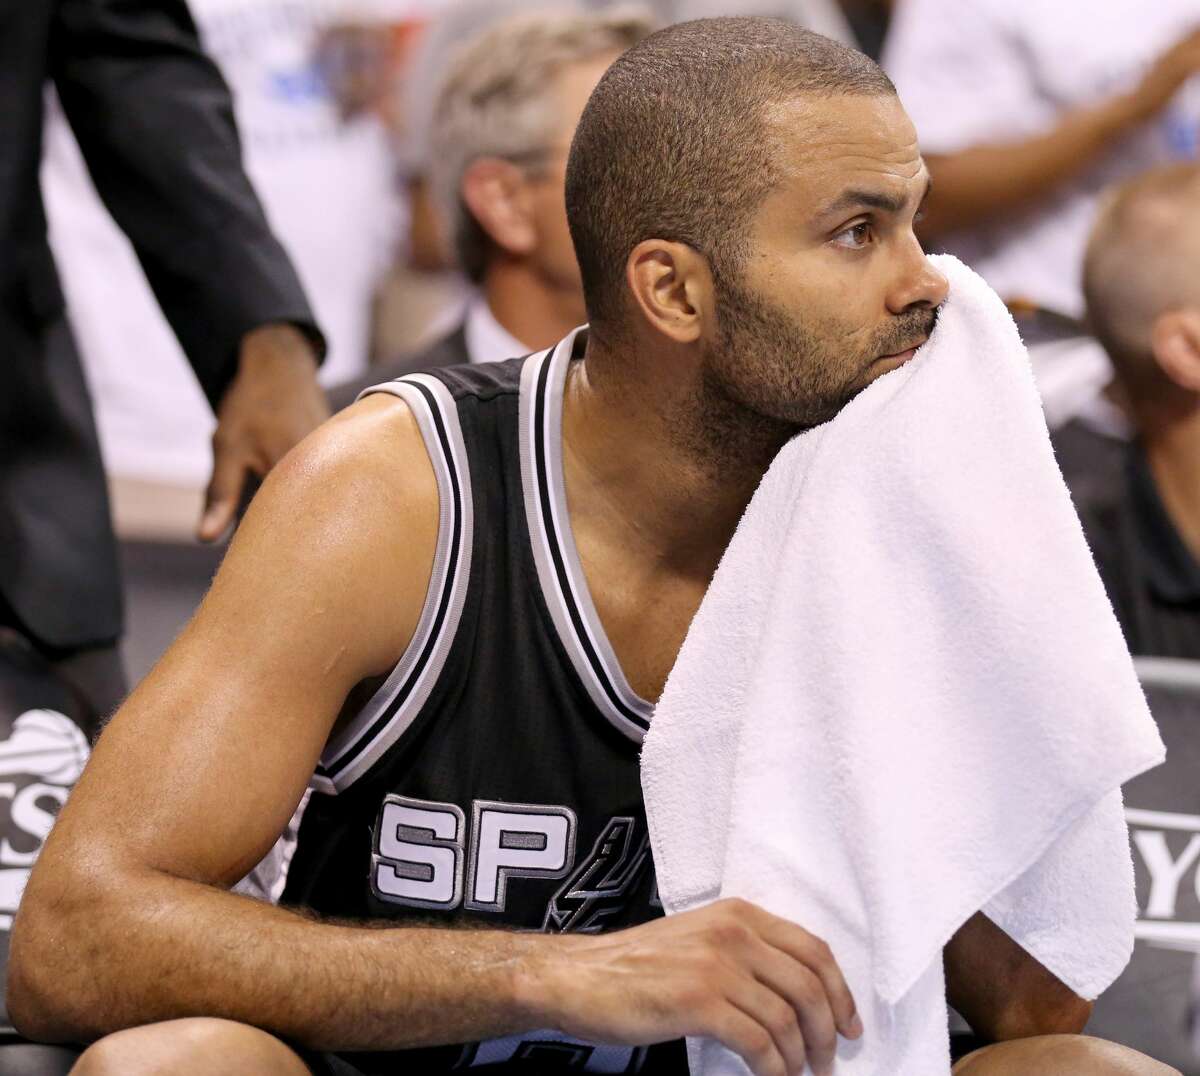 San Antonio Spurs' Tony Parker sits dejected on the bench late in Game 4 in the Western Conference semifinals against the Oklahoma City Thunder Sunday May 8, 2016 at Chesapeake Energy Arena in Oklahoma City, Oklahoma. The Thunder won 111-97.